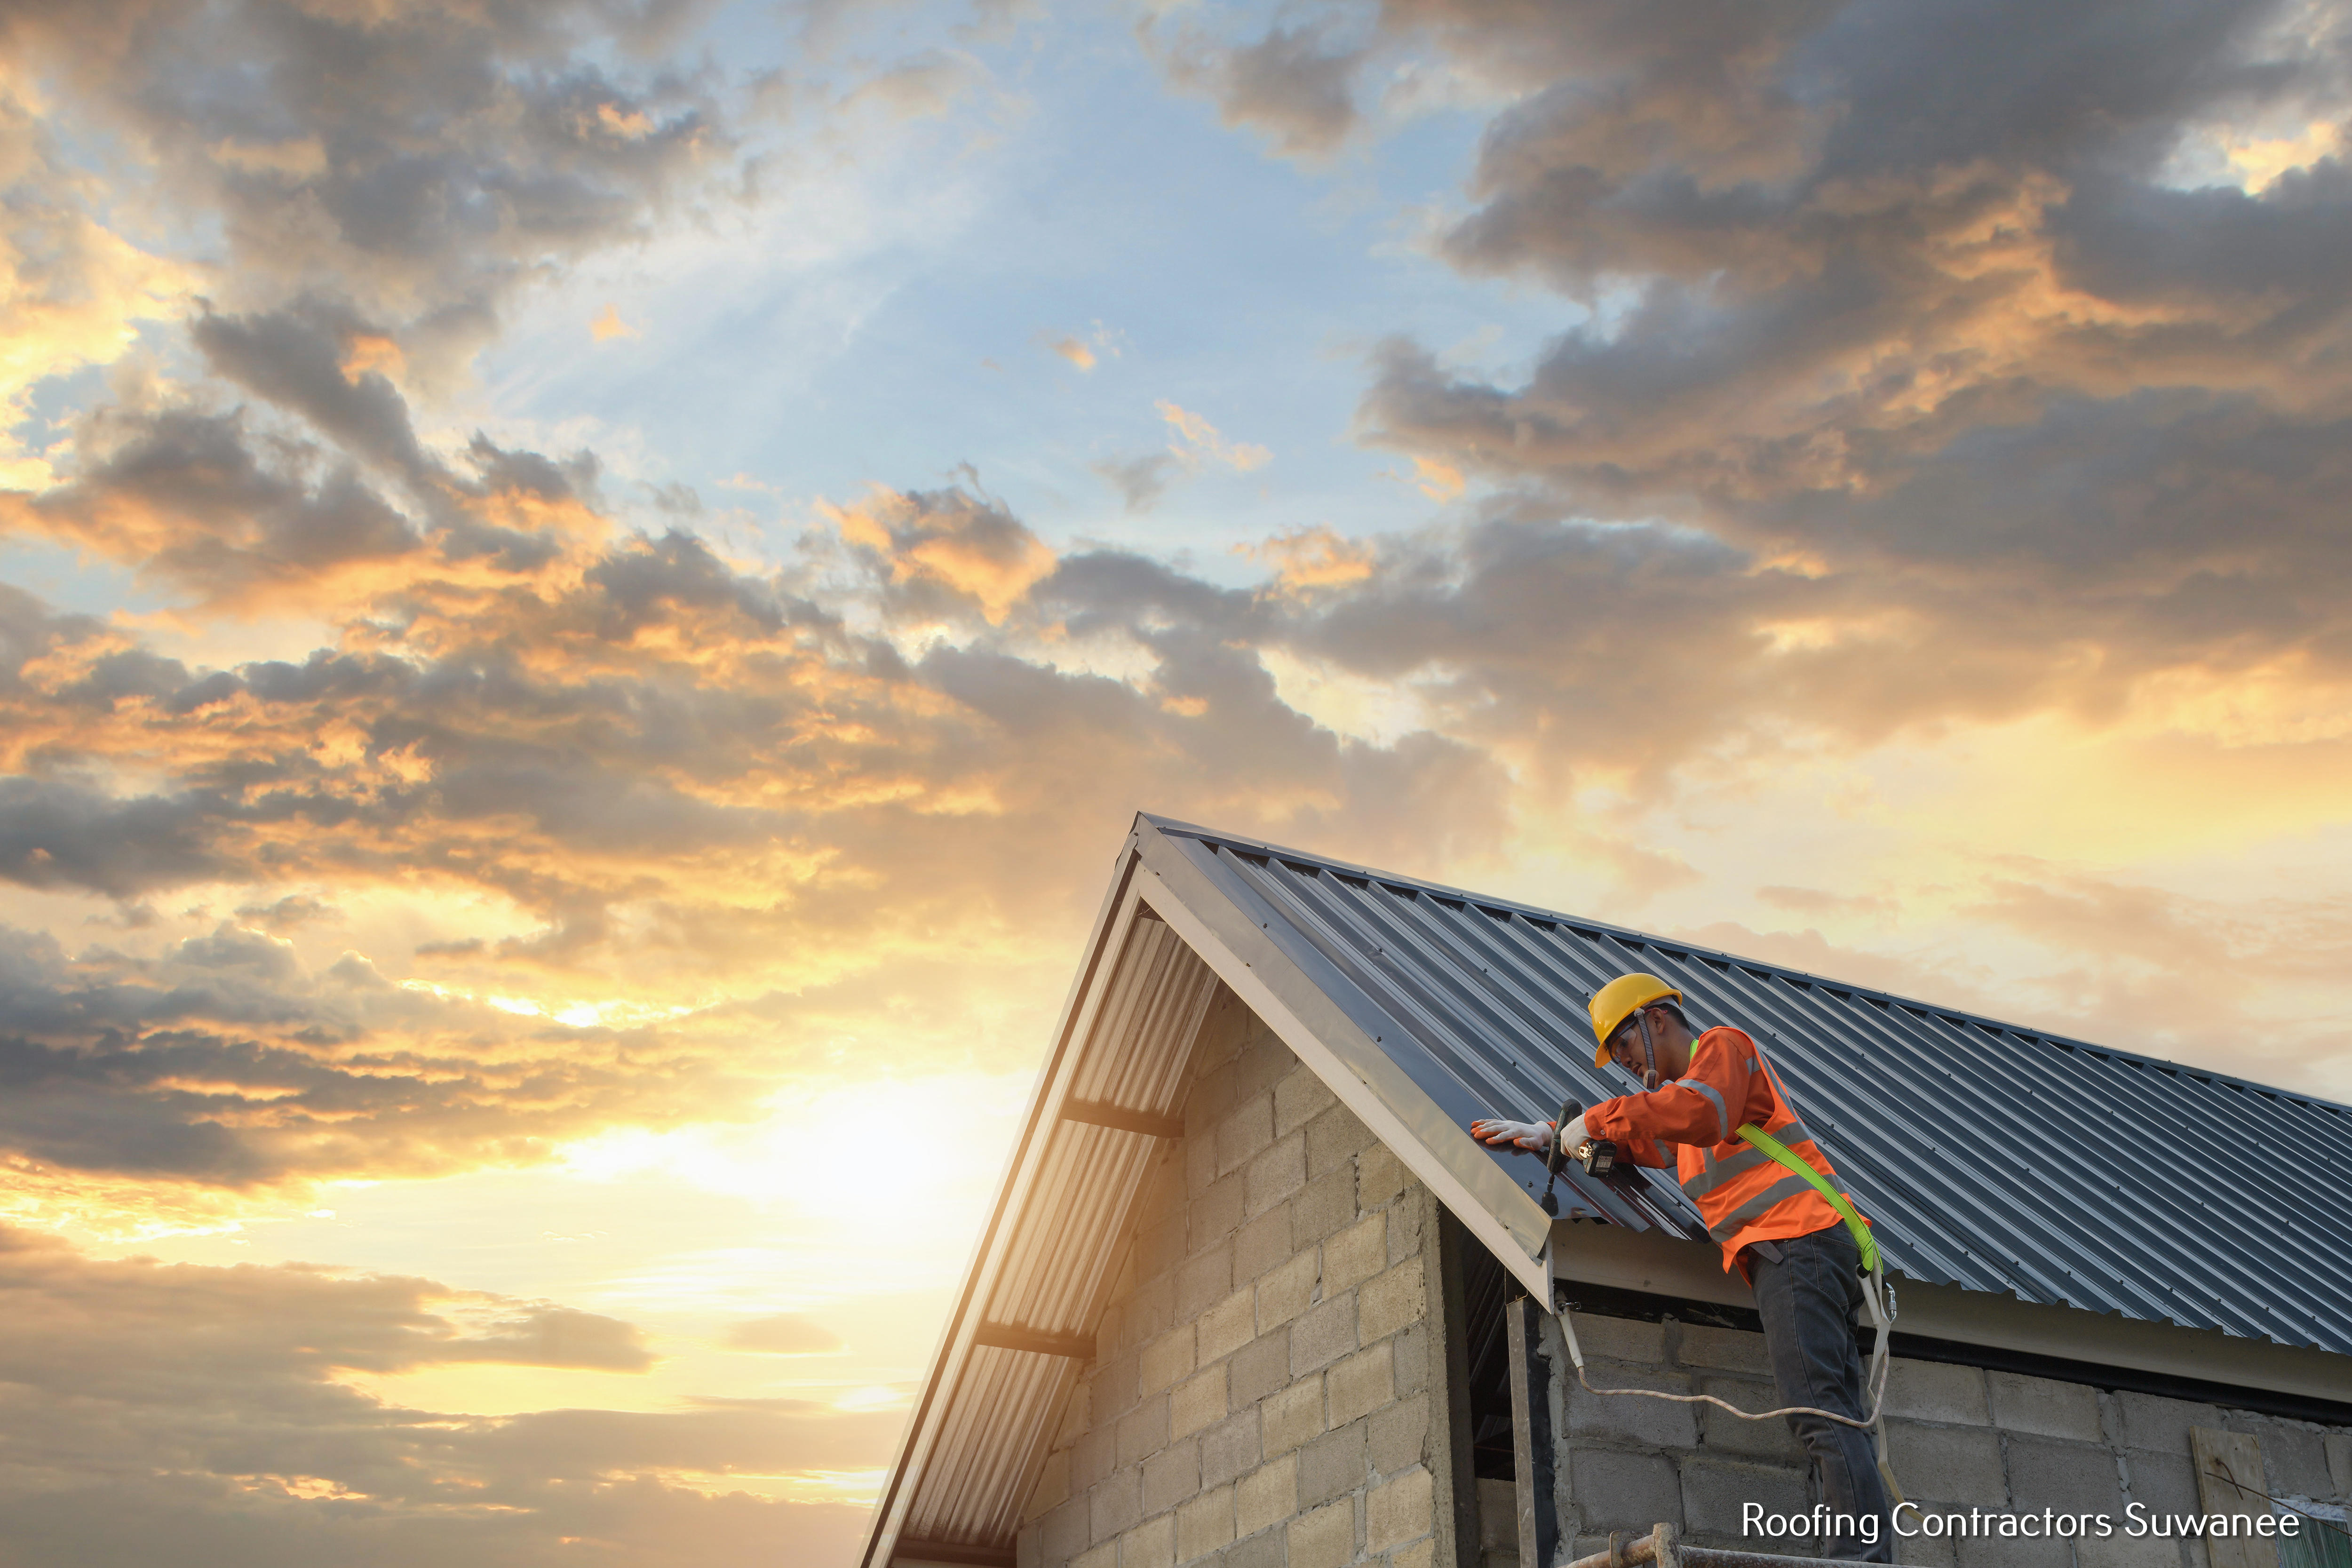 Nova Company Explains How to Choose the Best Roofing Contractor 